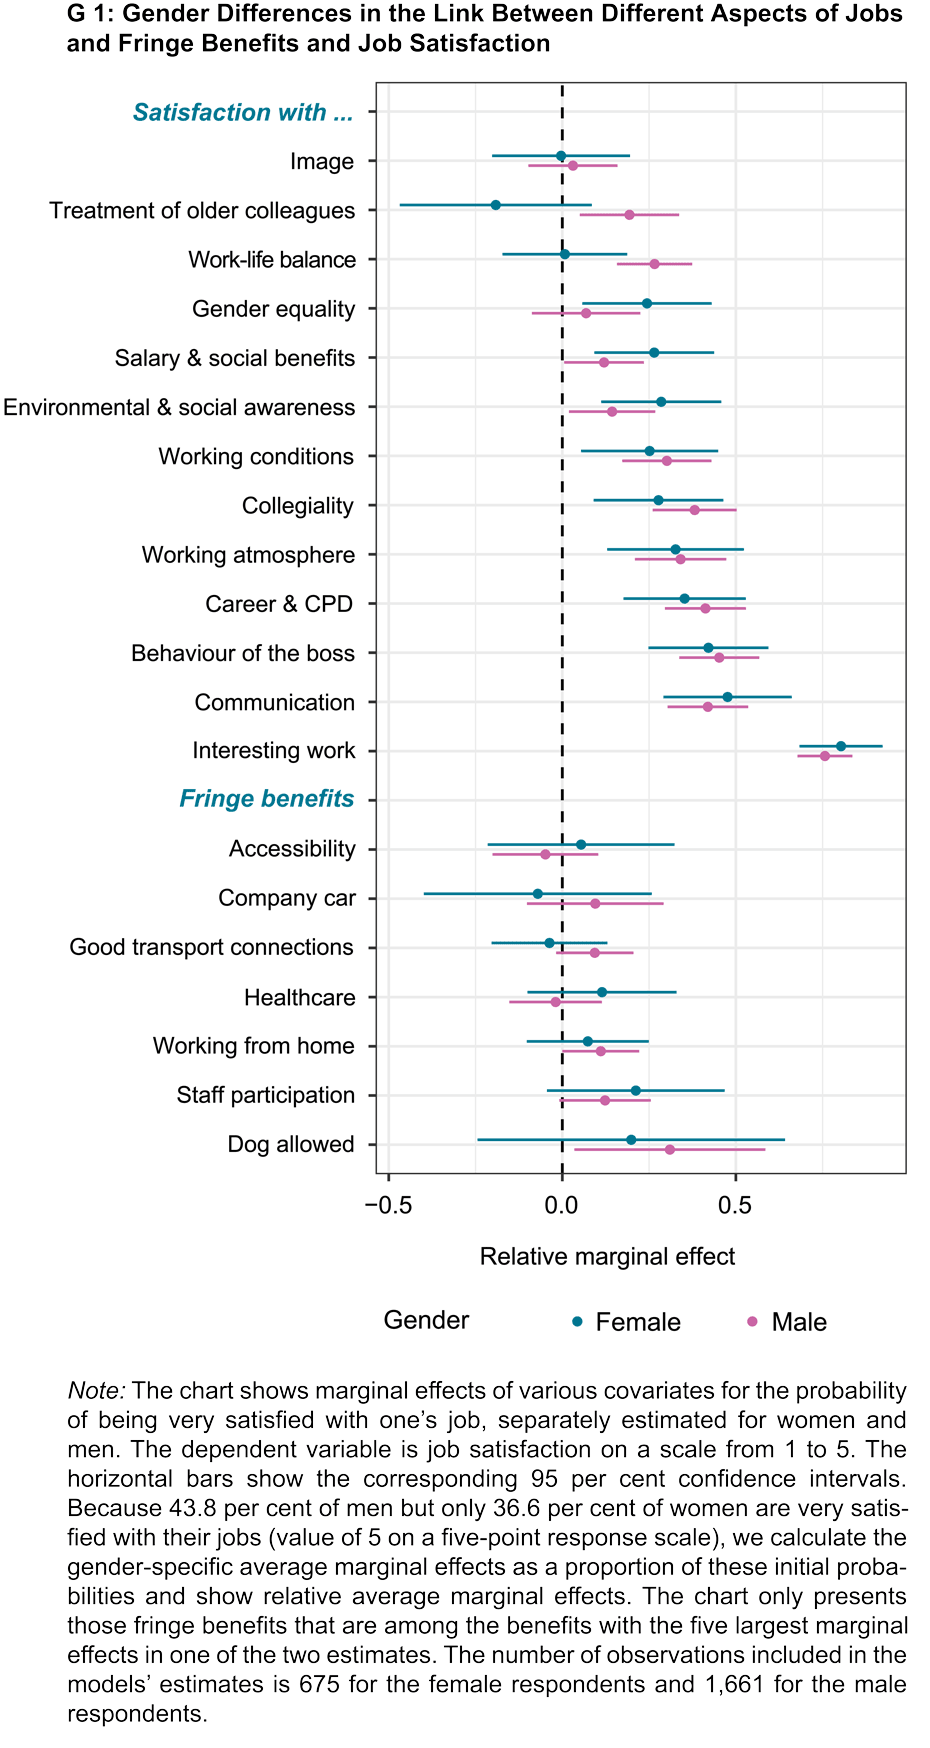 Gender differences in the link between different aspects of jobs and fringe benefits and job satisfaction